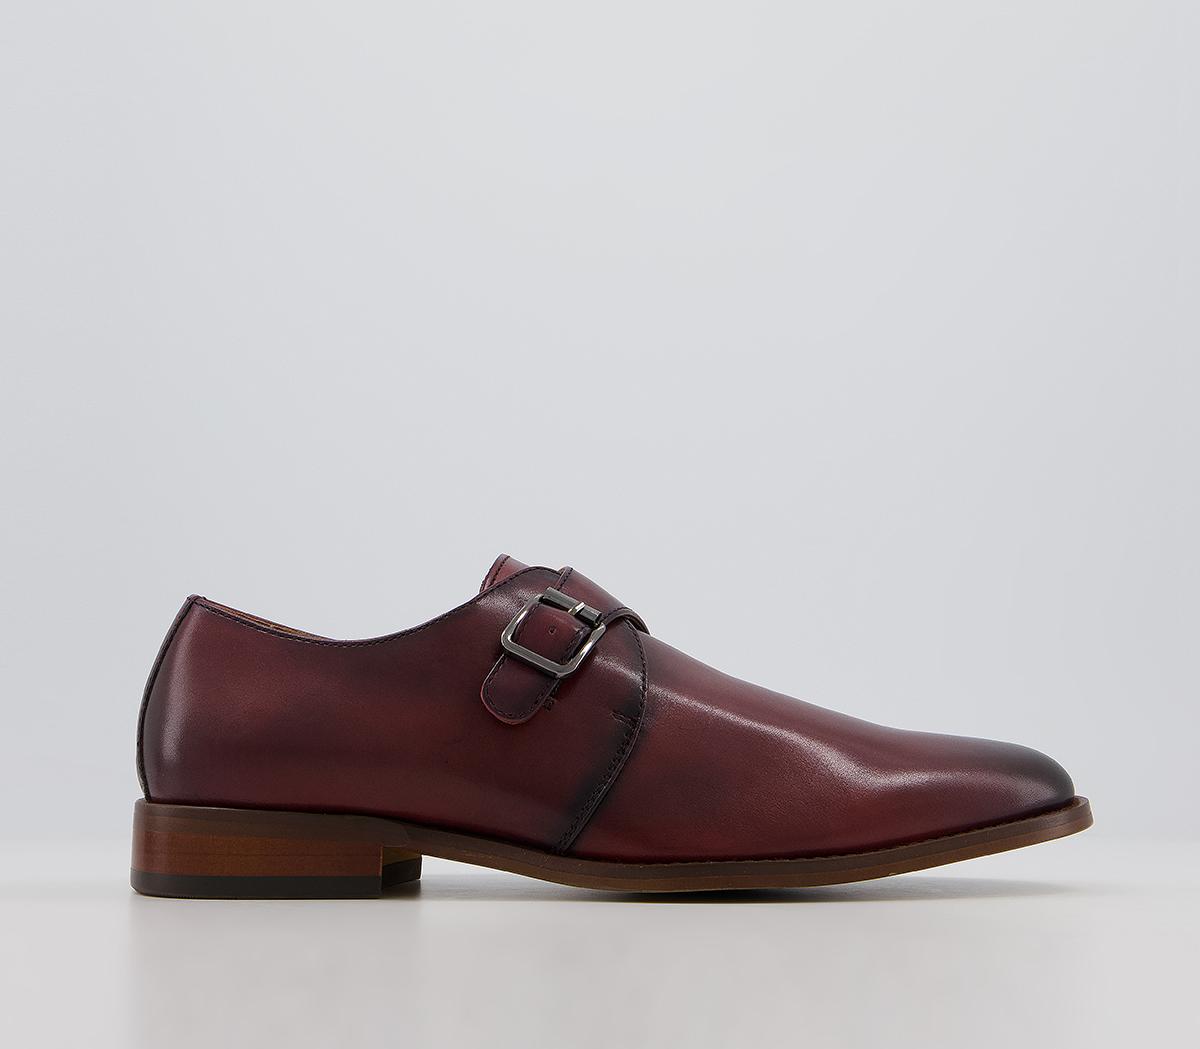 OfficeMaster Single Strap Monk ShoesBurgundy Leather